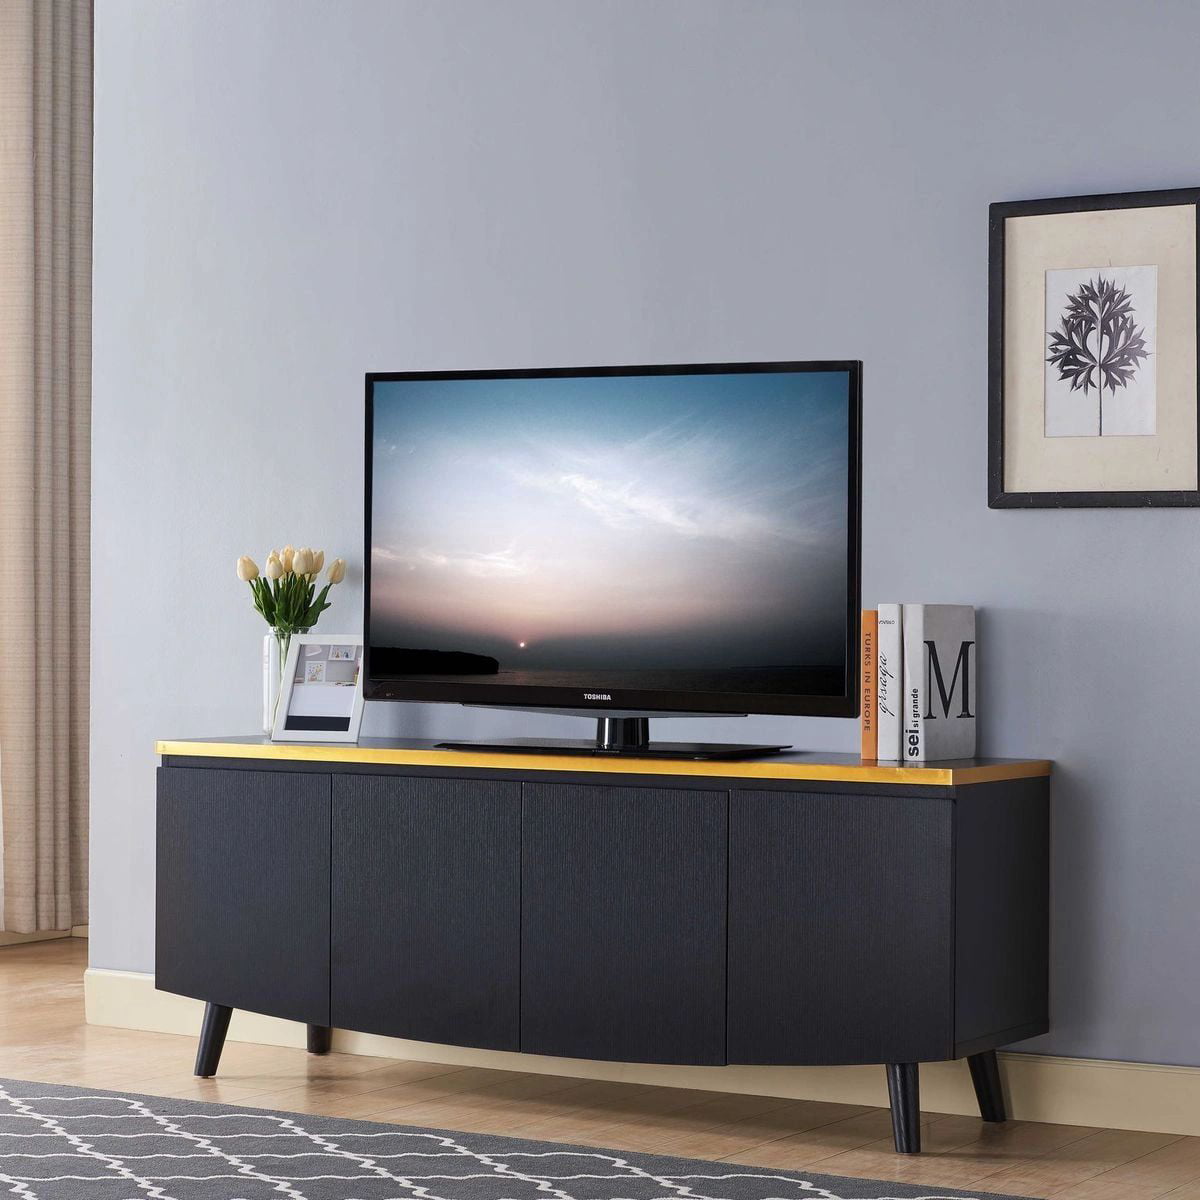 FC Design 60"W Modern TV Stand with Two Cabinets in Black ...